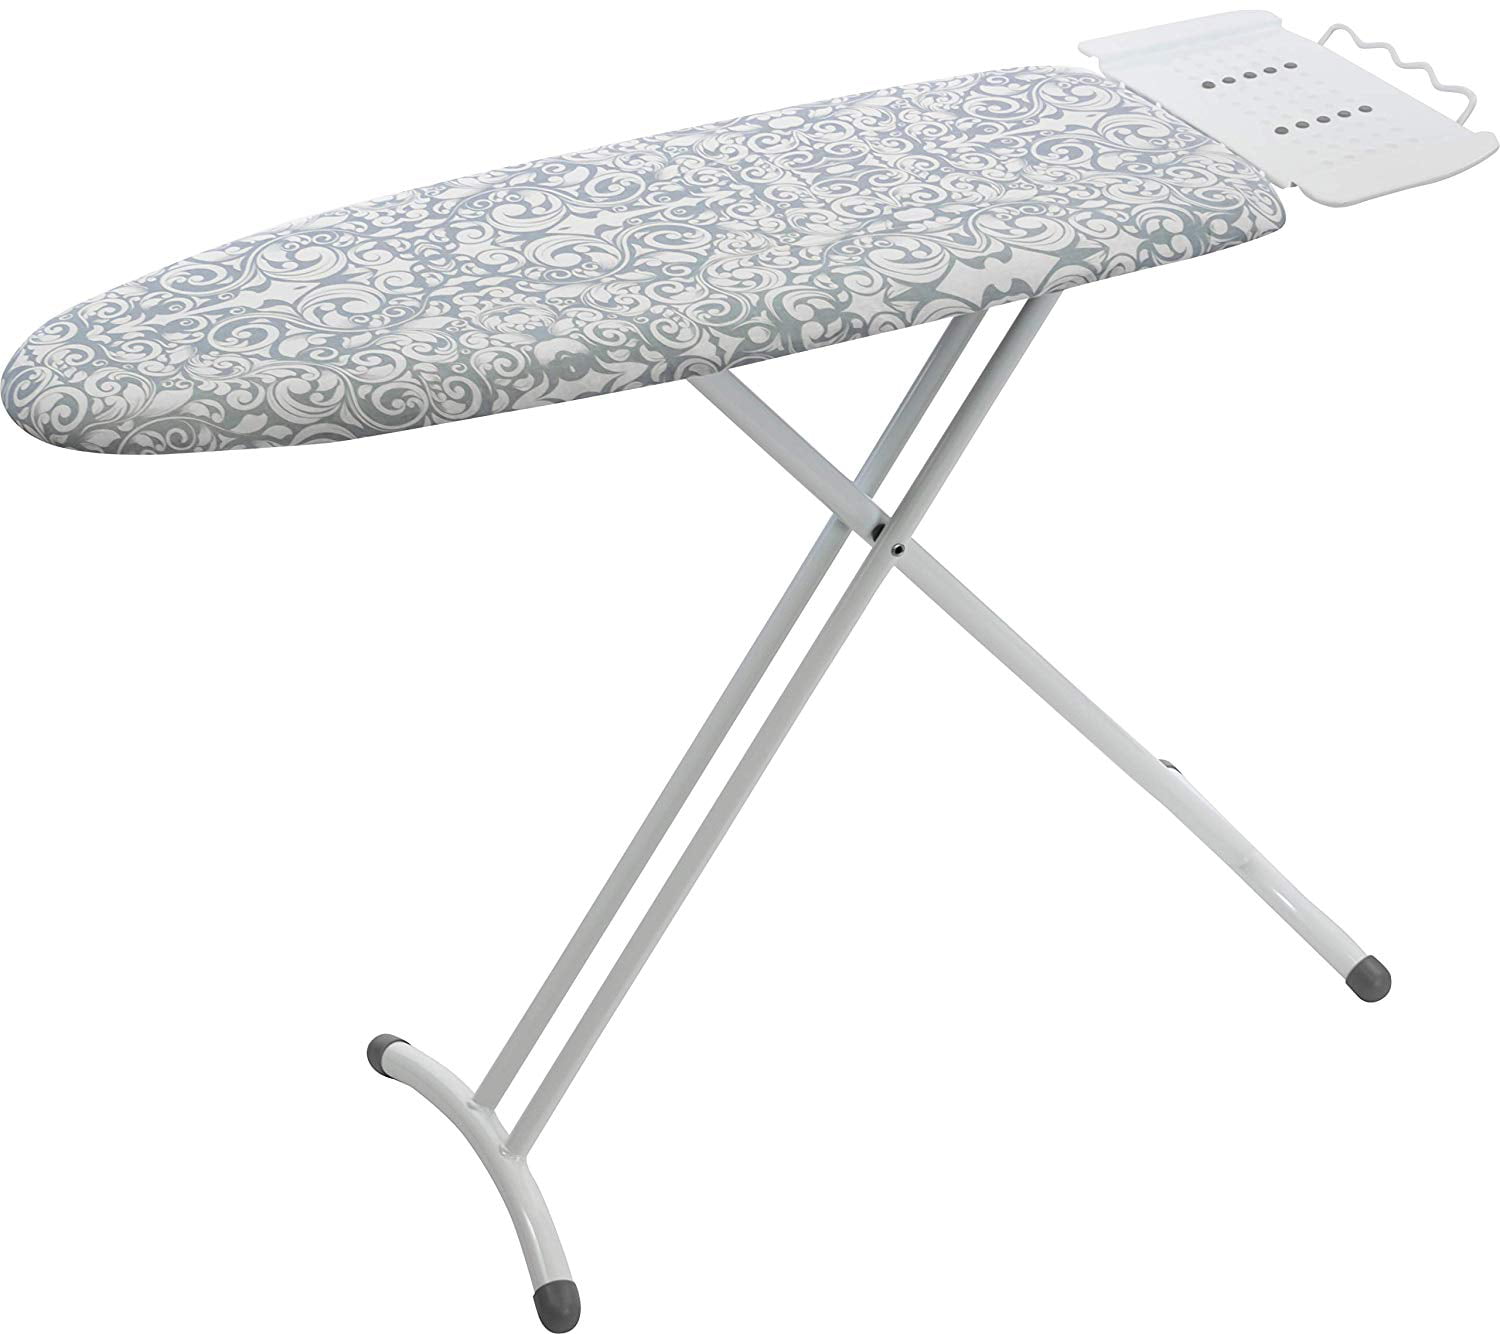 New Ironing Board Home Travel Portable Sleeve Cuffs Mini Table With FoldingN9L2 